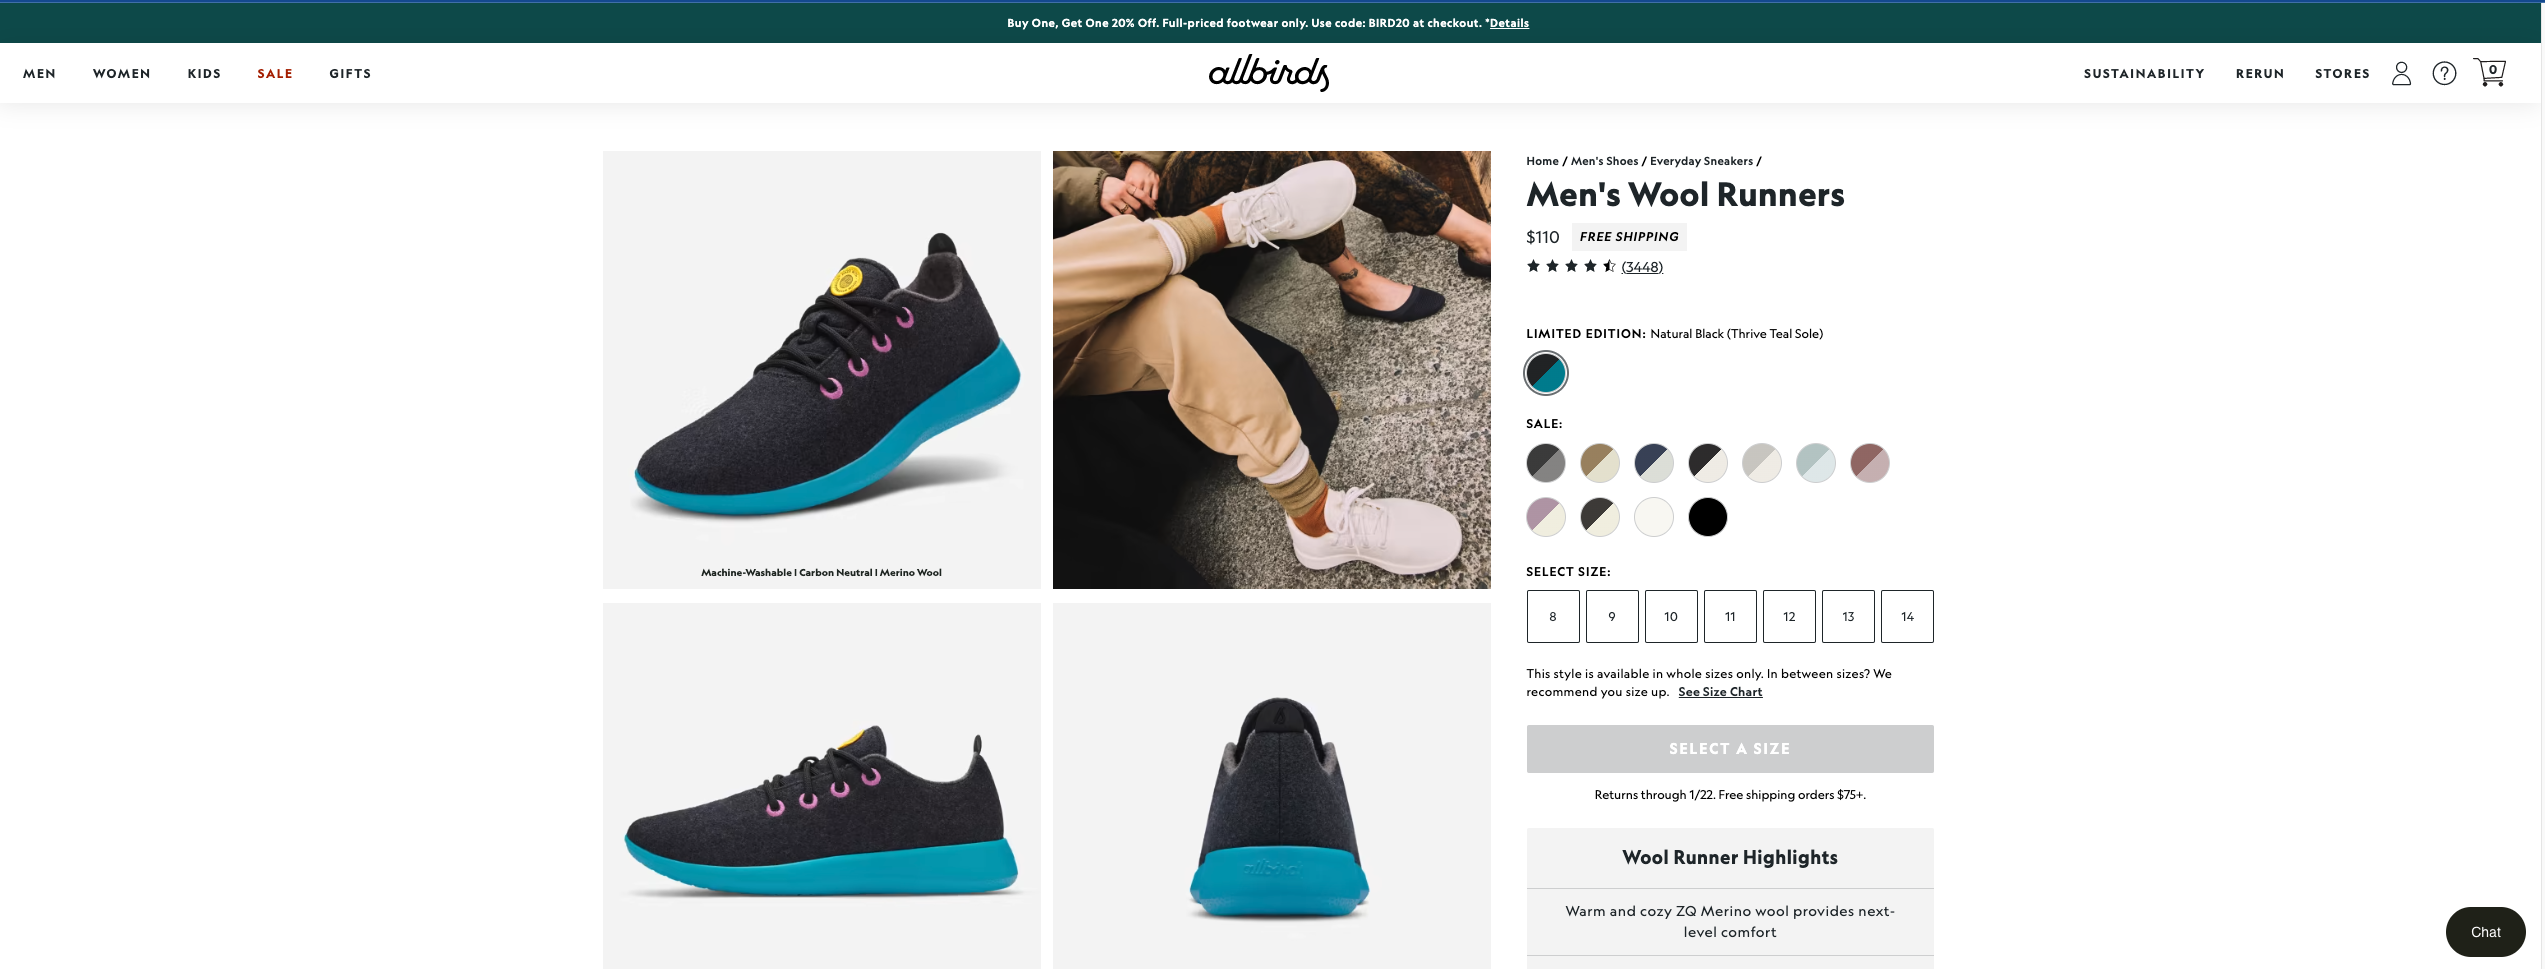 Allbirds Product Page Example